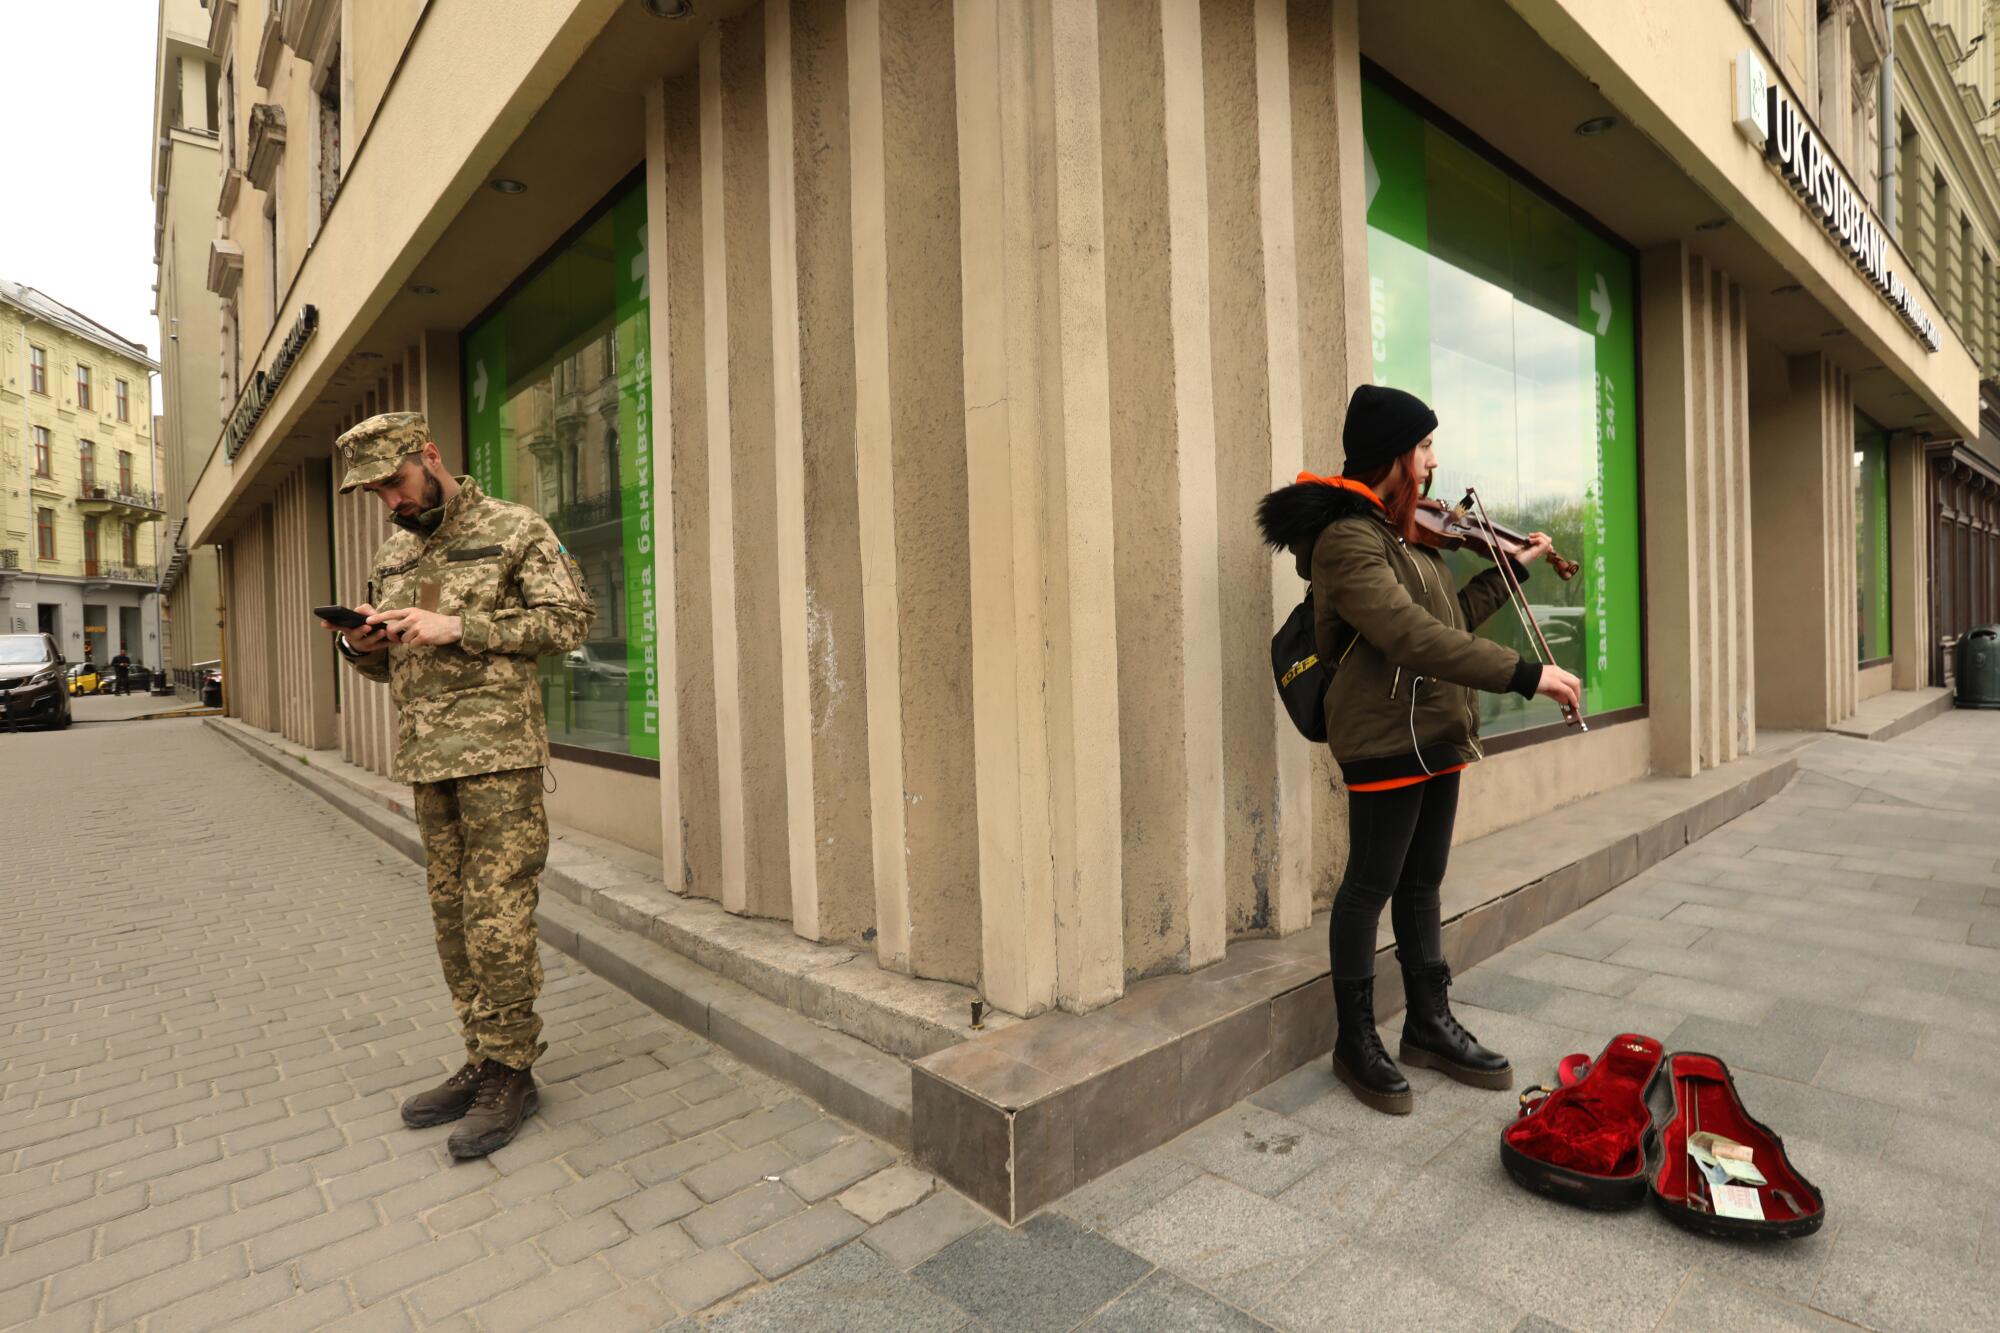 A Ukrainian soldier and a violinist share a corner in downtown Lviv.